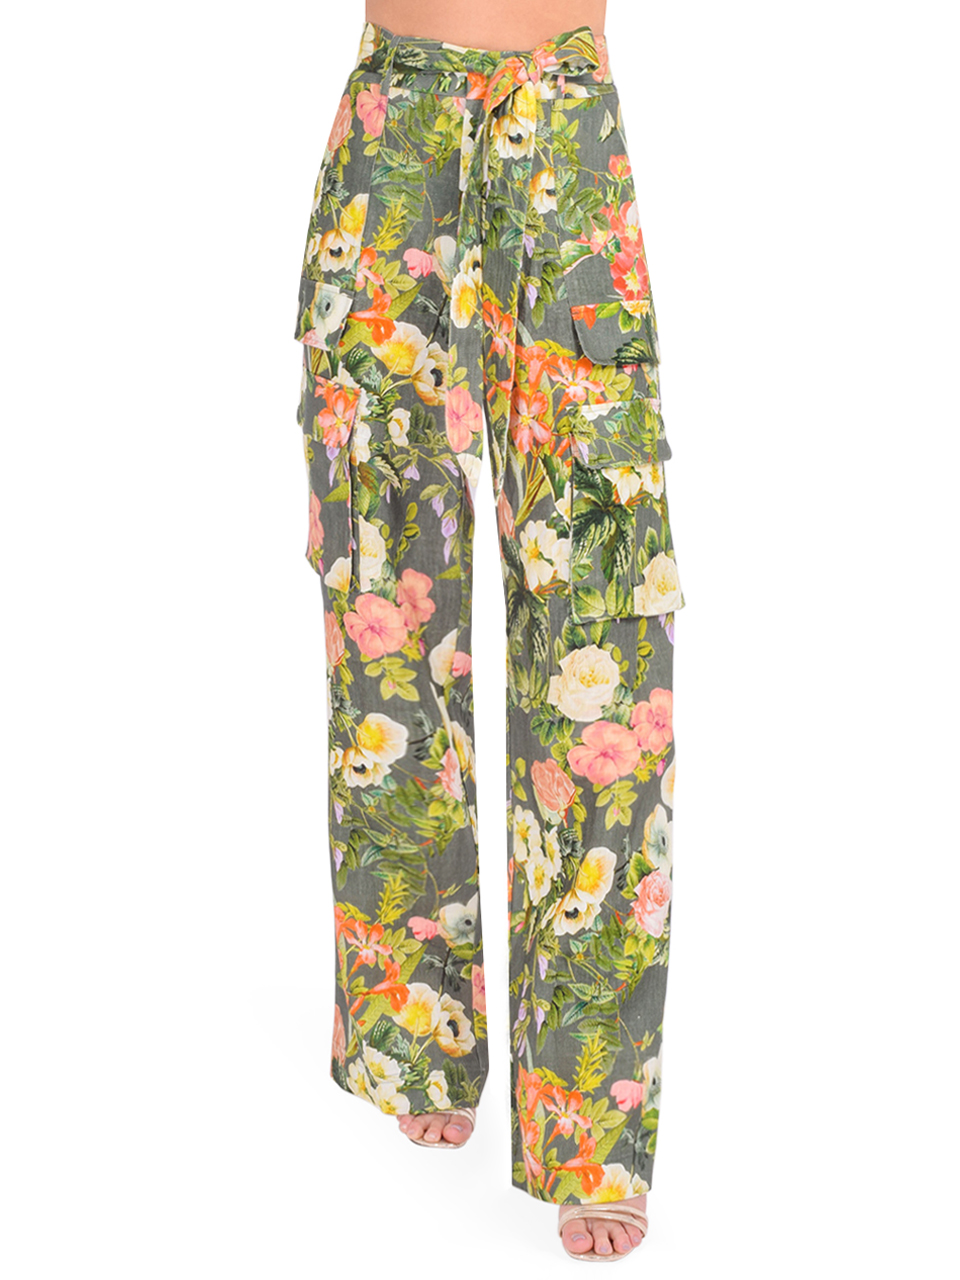 Cara Cara Ginny Cargo Pant in Olive Kingston Floral Front View 